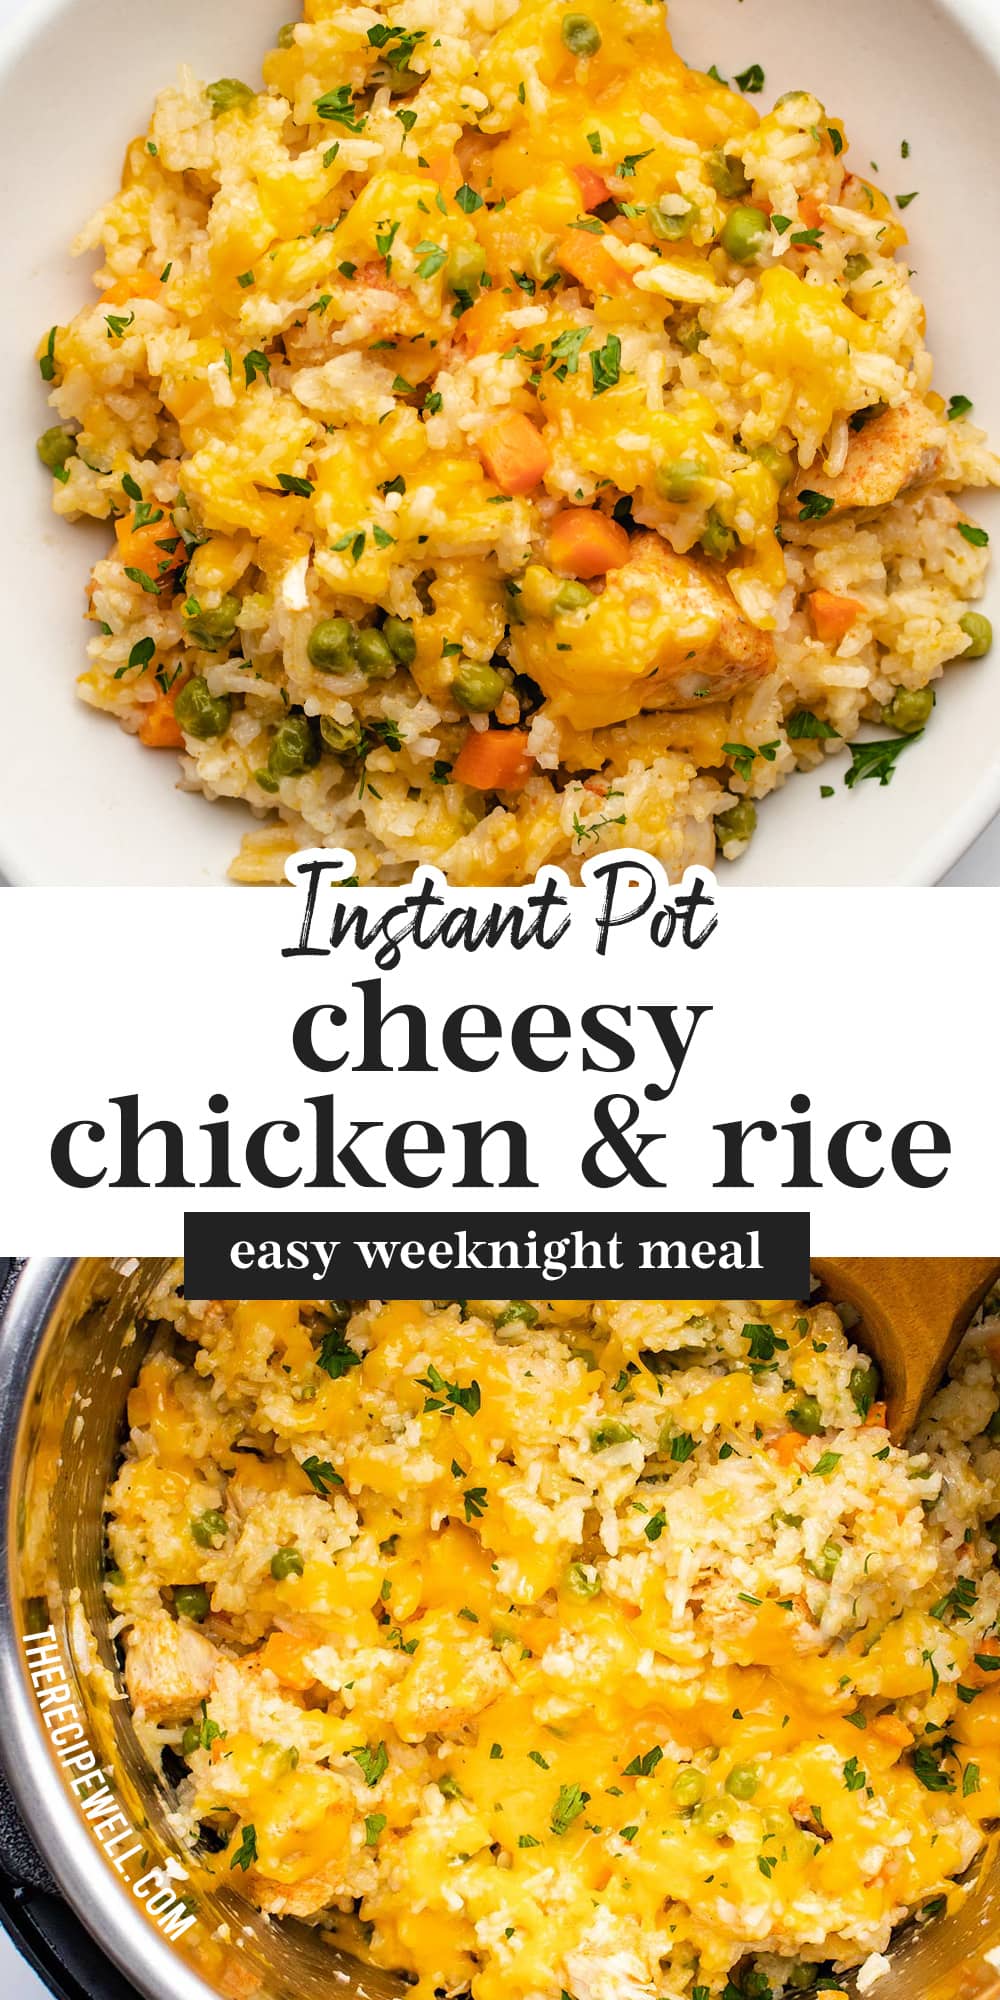 Instant Pot Cheesy Chicken and Rice is a delicious family-friendly meal. With very little prep and less than 10 ingredients, this one-pot recipe makes busy weeknights so much easier. via @therecipewell